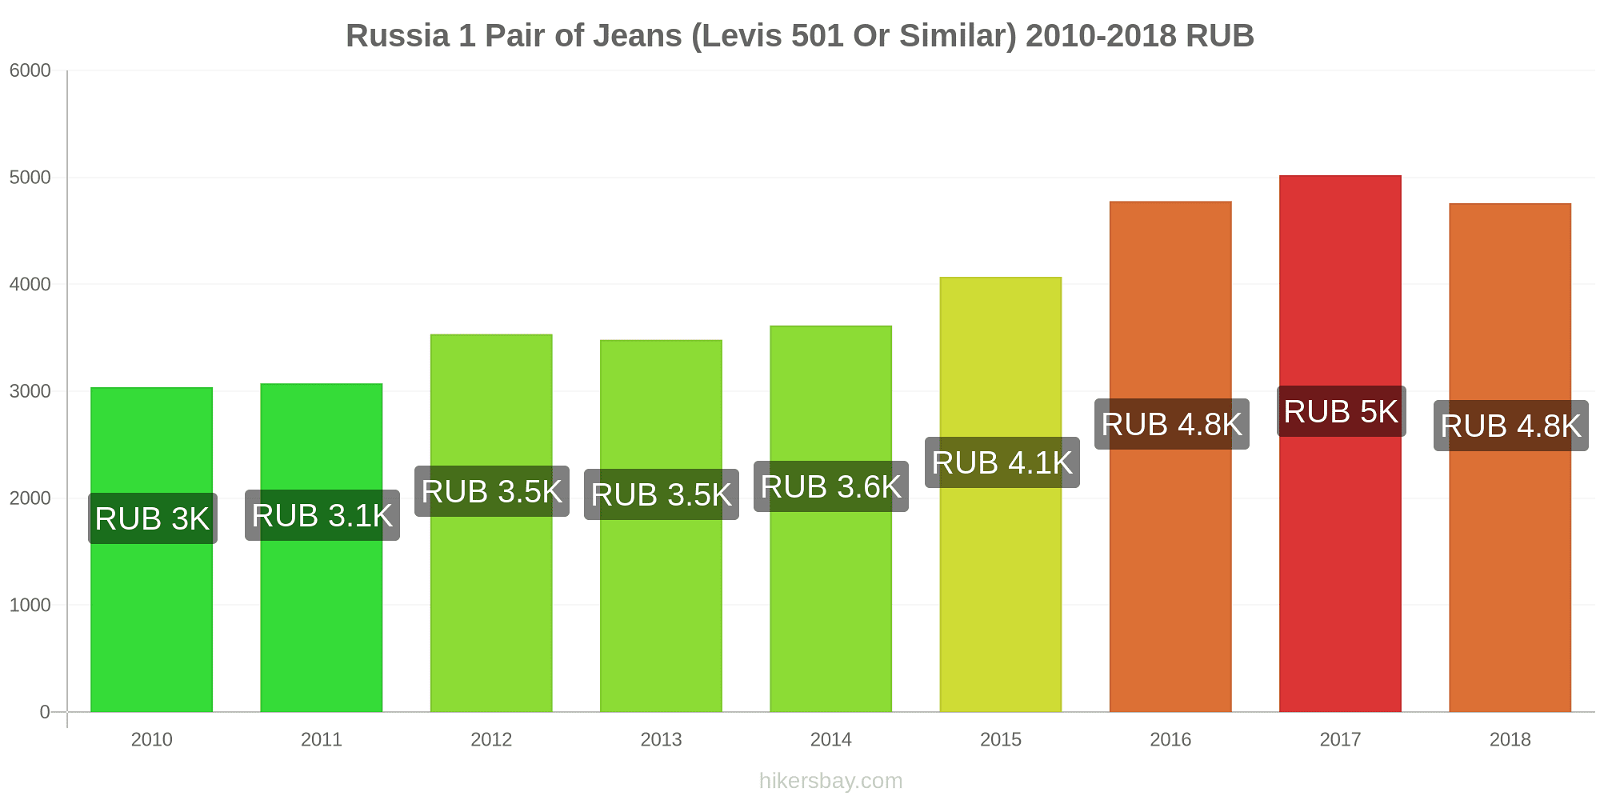 Russia price changes 1 pair of jeans (Levis 501 or similar) hikersbay.com